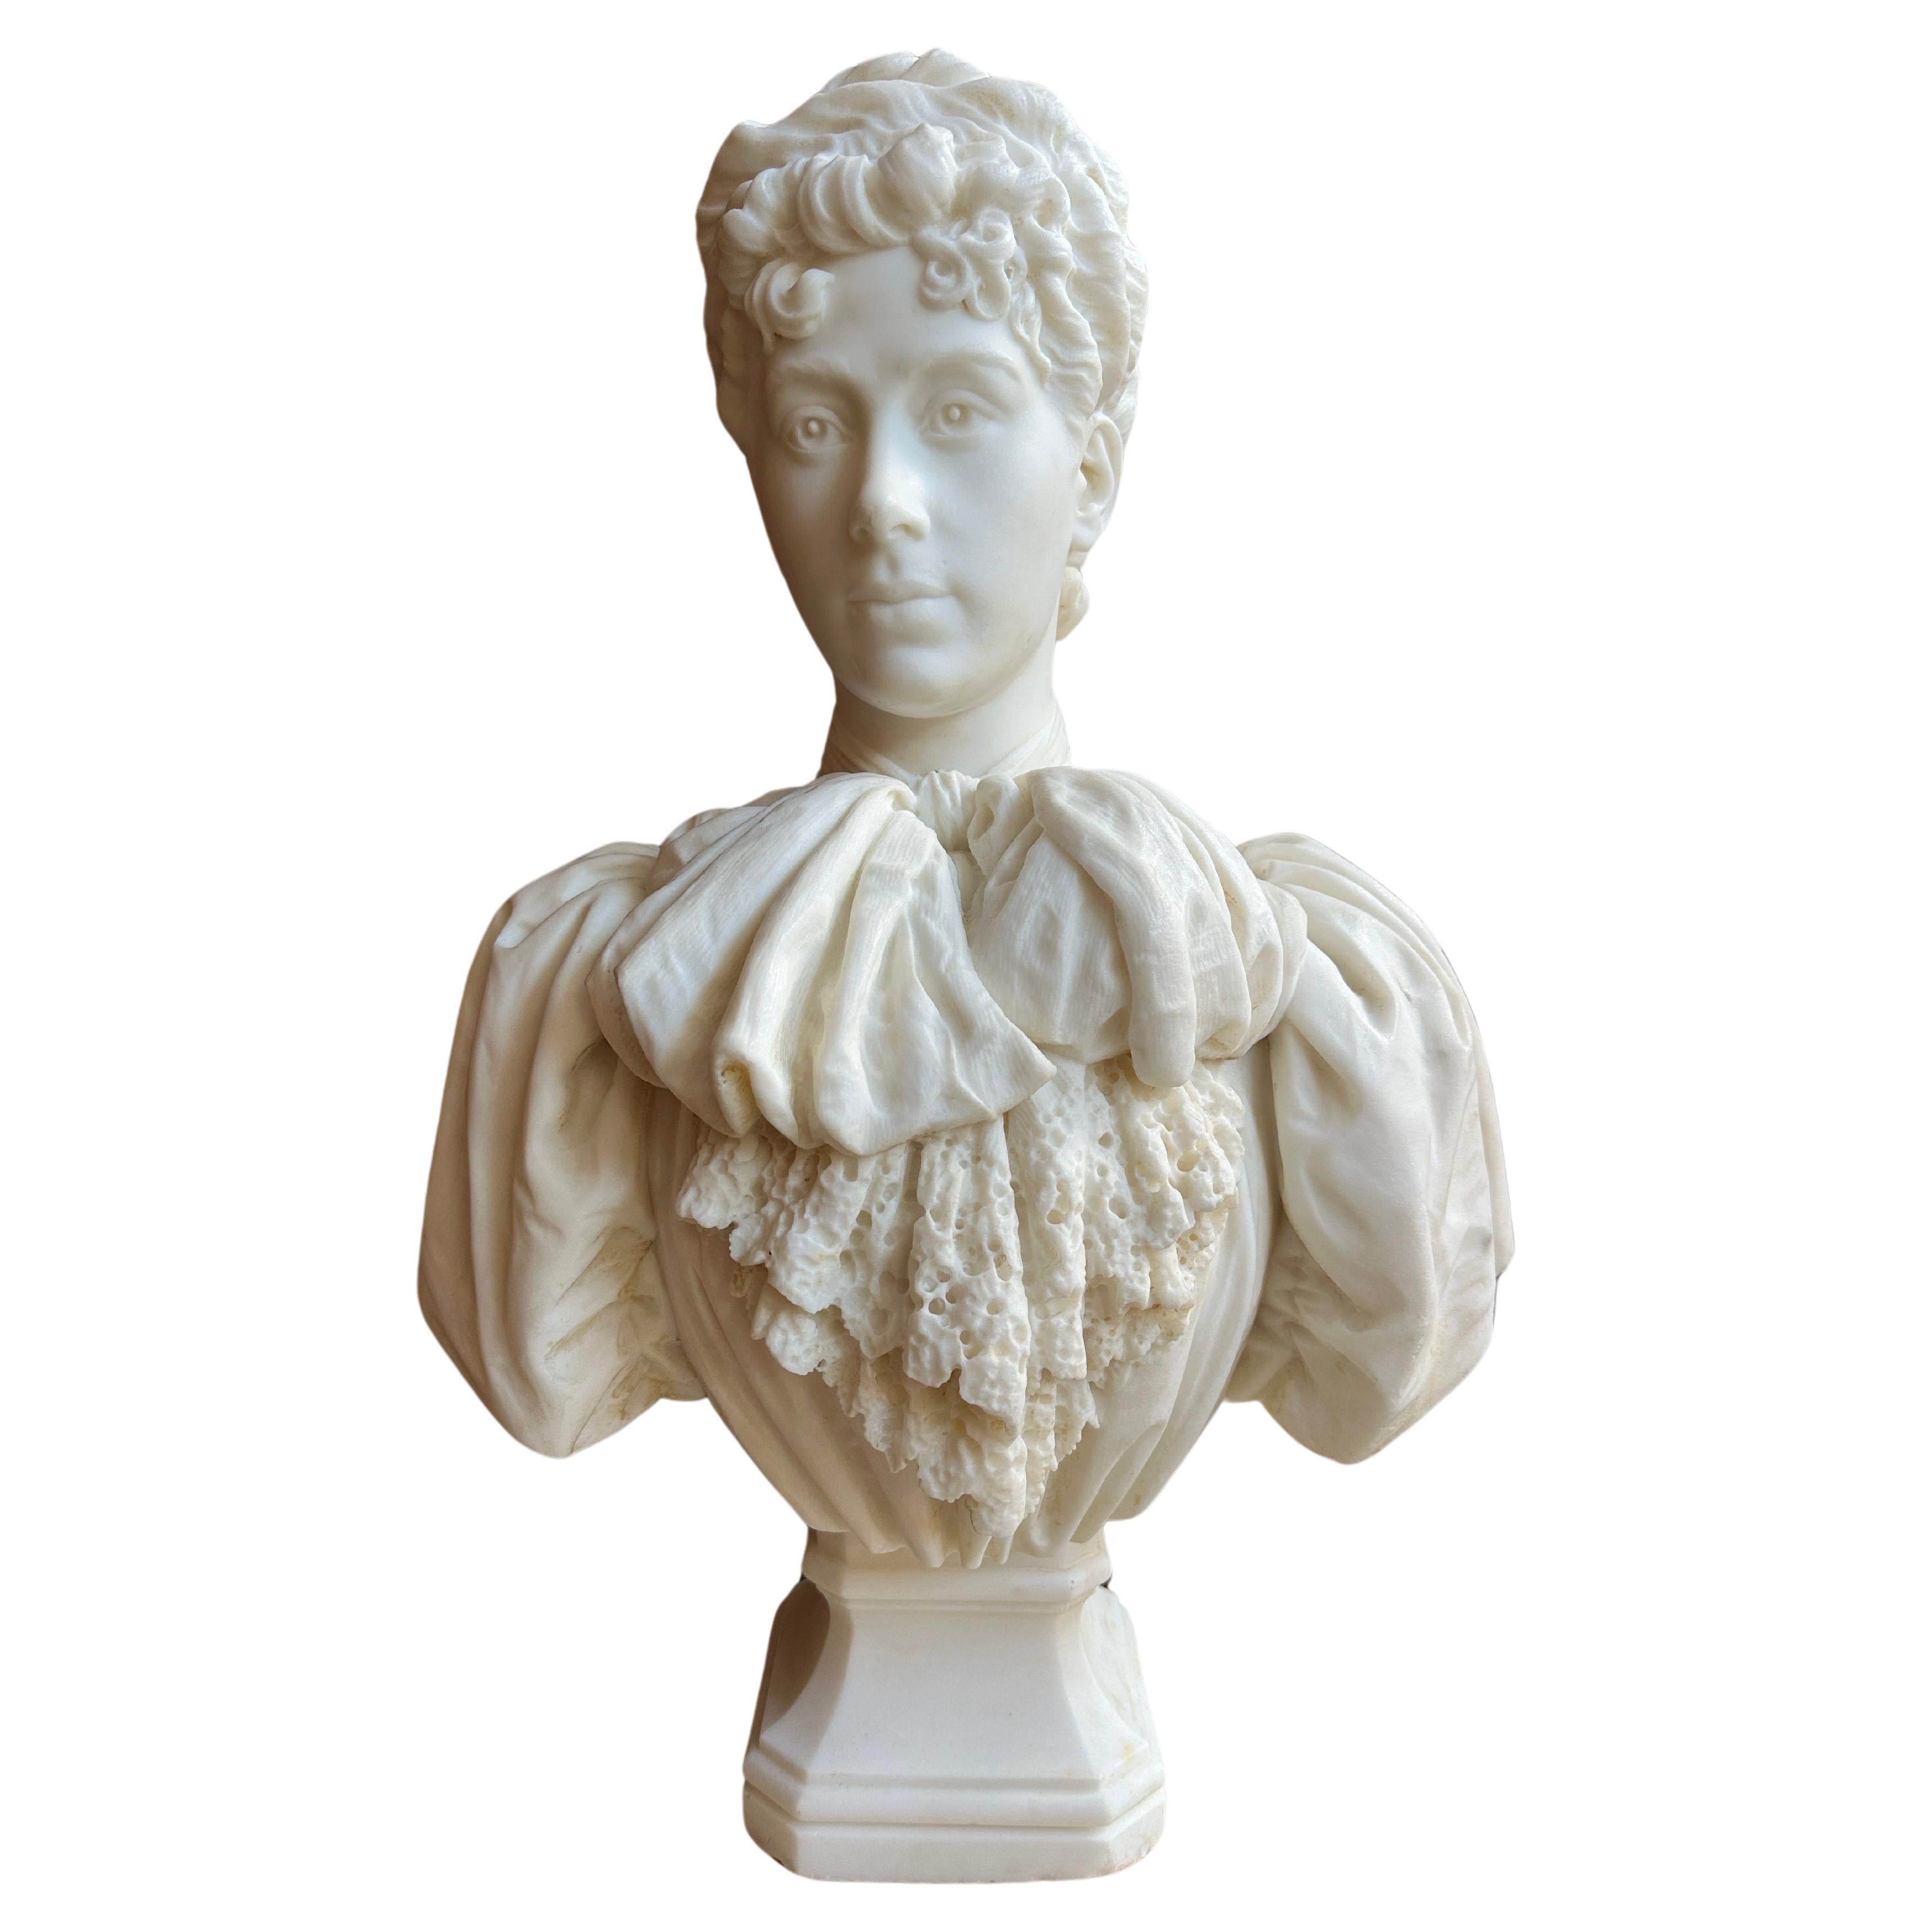 A very well execute female bust in the late 19th century taste, by Florentine sculptor Giovanni Focardi ( signed and dated). Born in Florence and studied under Enrico Pazzi. He moved to London in 1875 ( explaining bust marked Florence not Firenze)